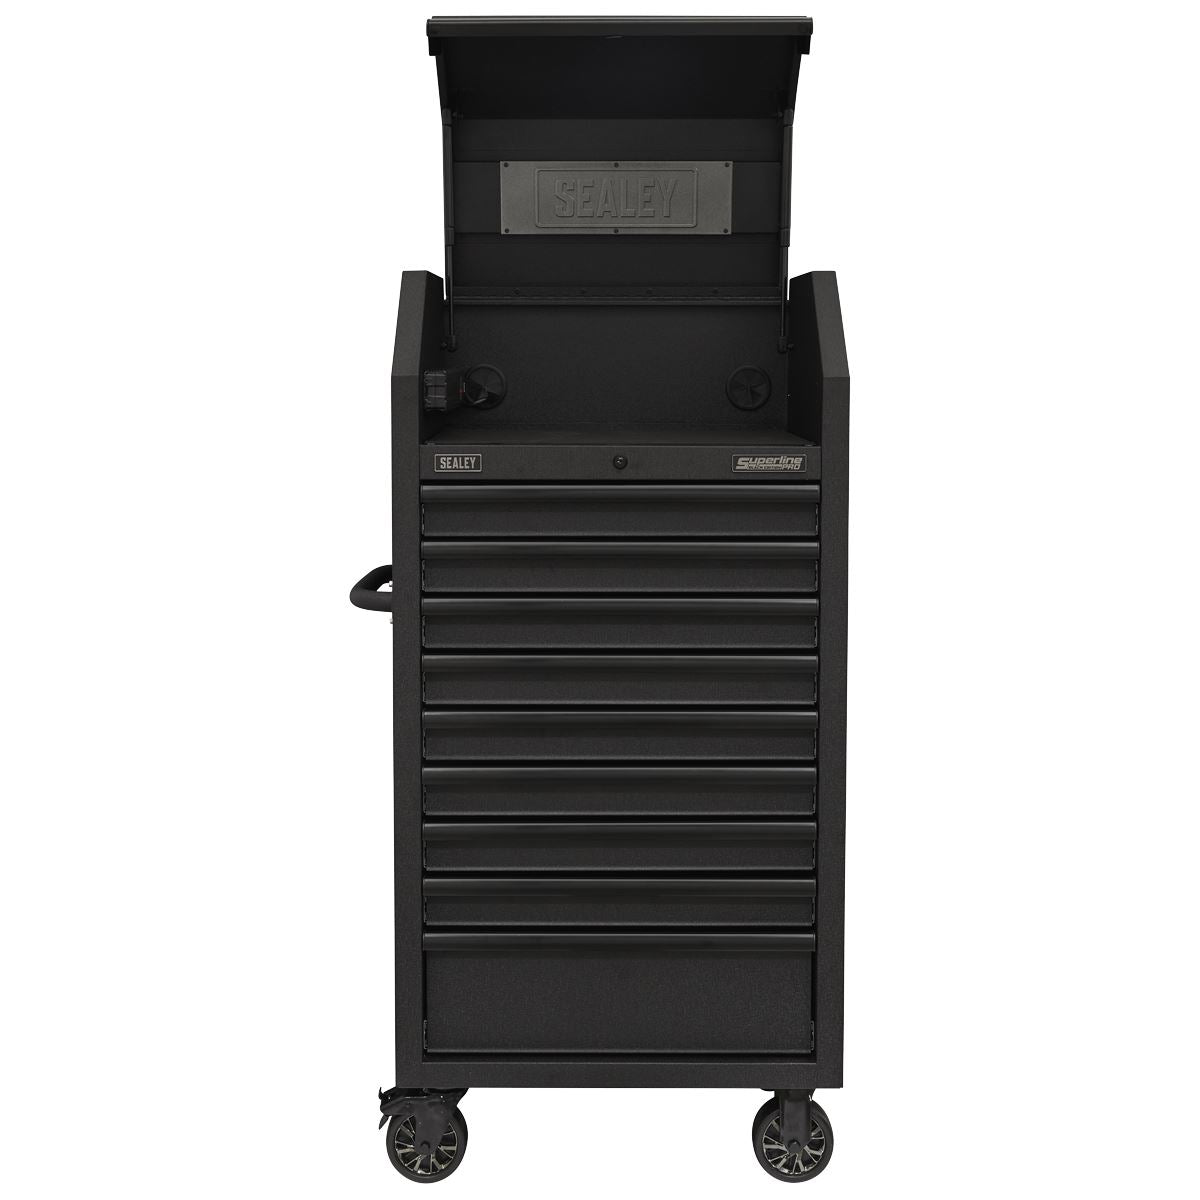 Sealey Superline Pro Tower Cabinet 9 Drawer 690mm with Soft Close Drawers & Power Strip